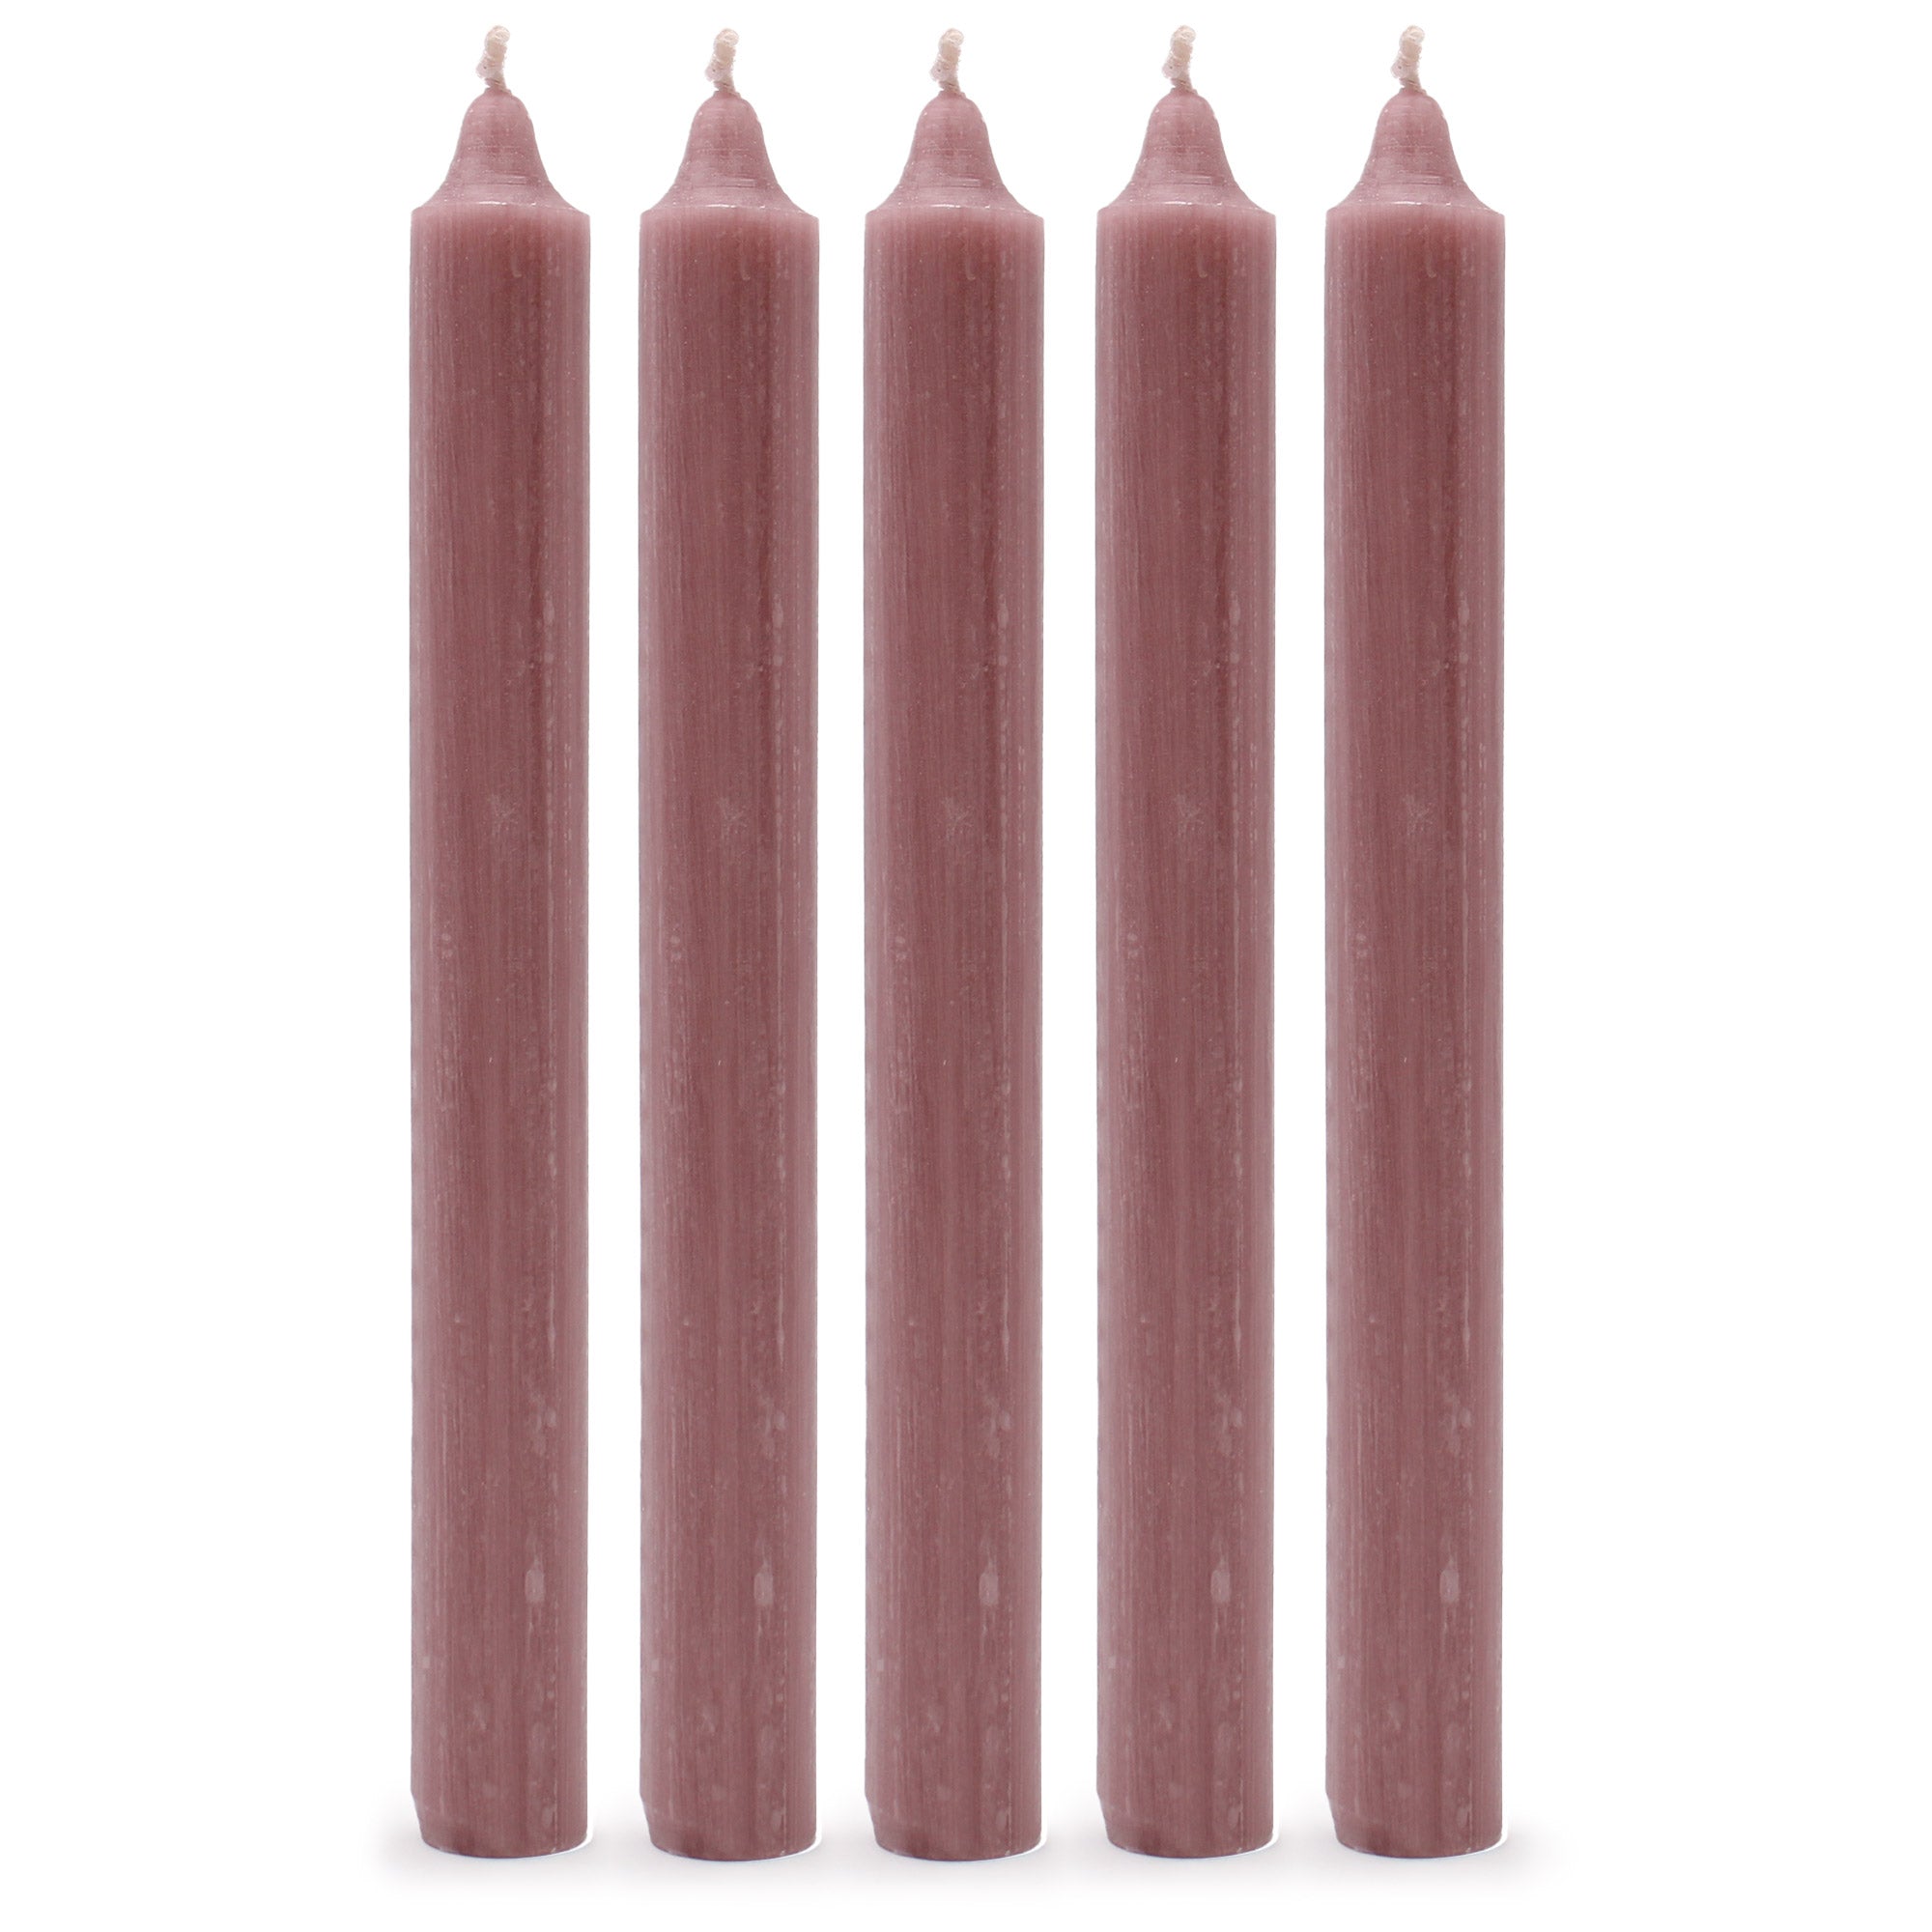 View Solid Colour Dinner Candles Rustic Dusty Pink Pack of 5 information